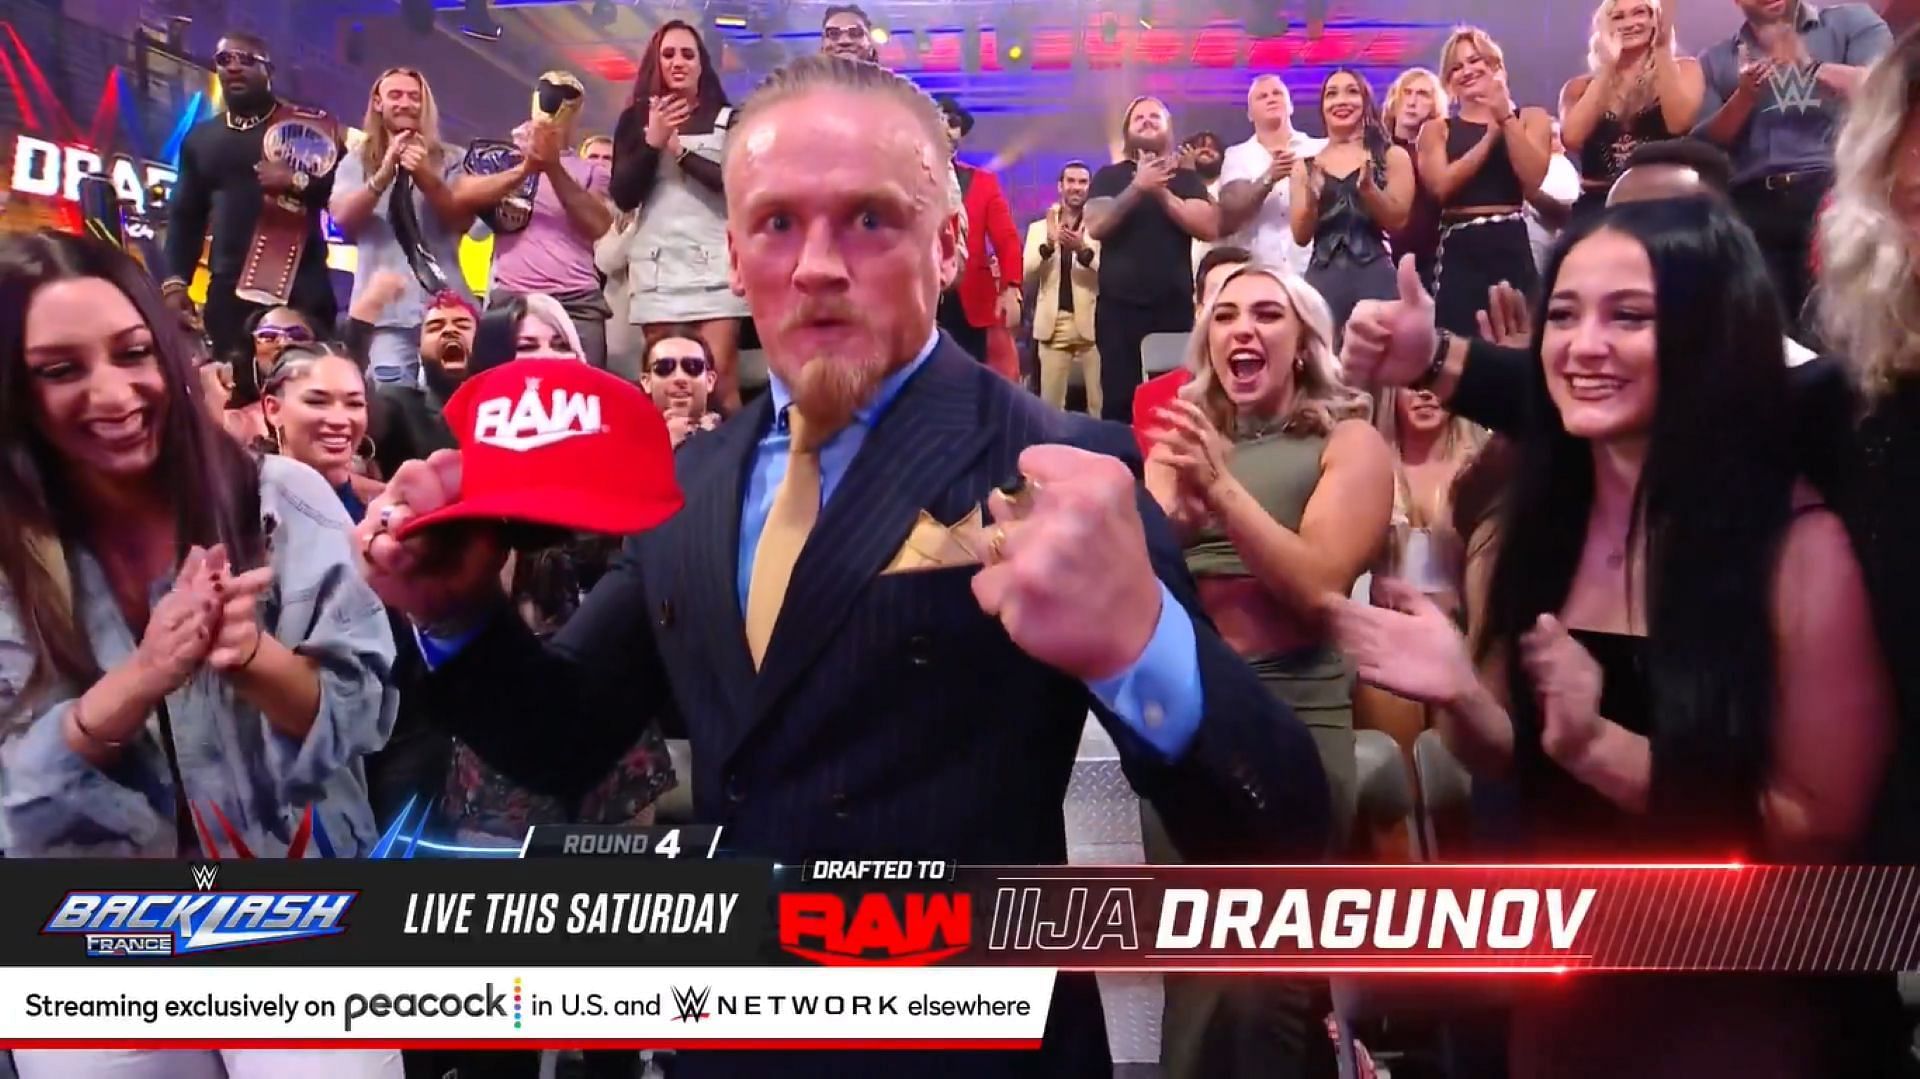 The Mad Dragon will now be chopping the stars of RAW.